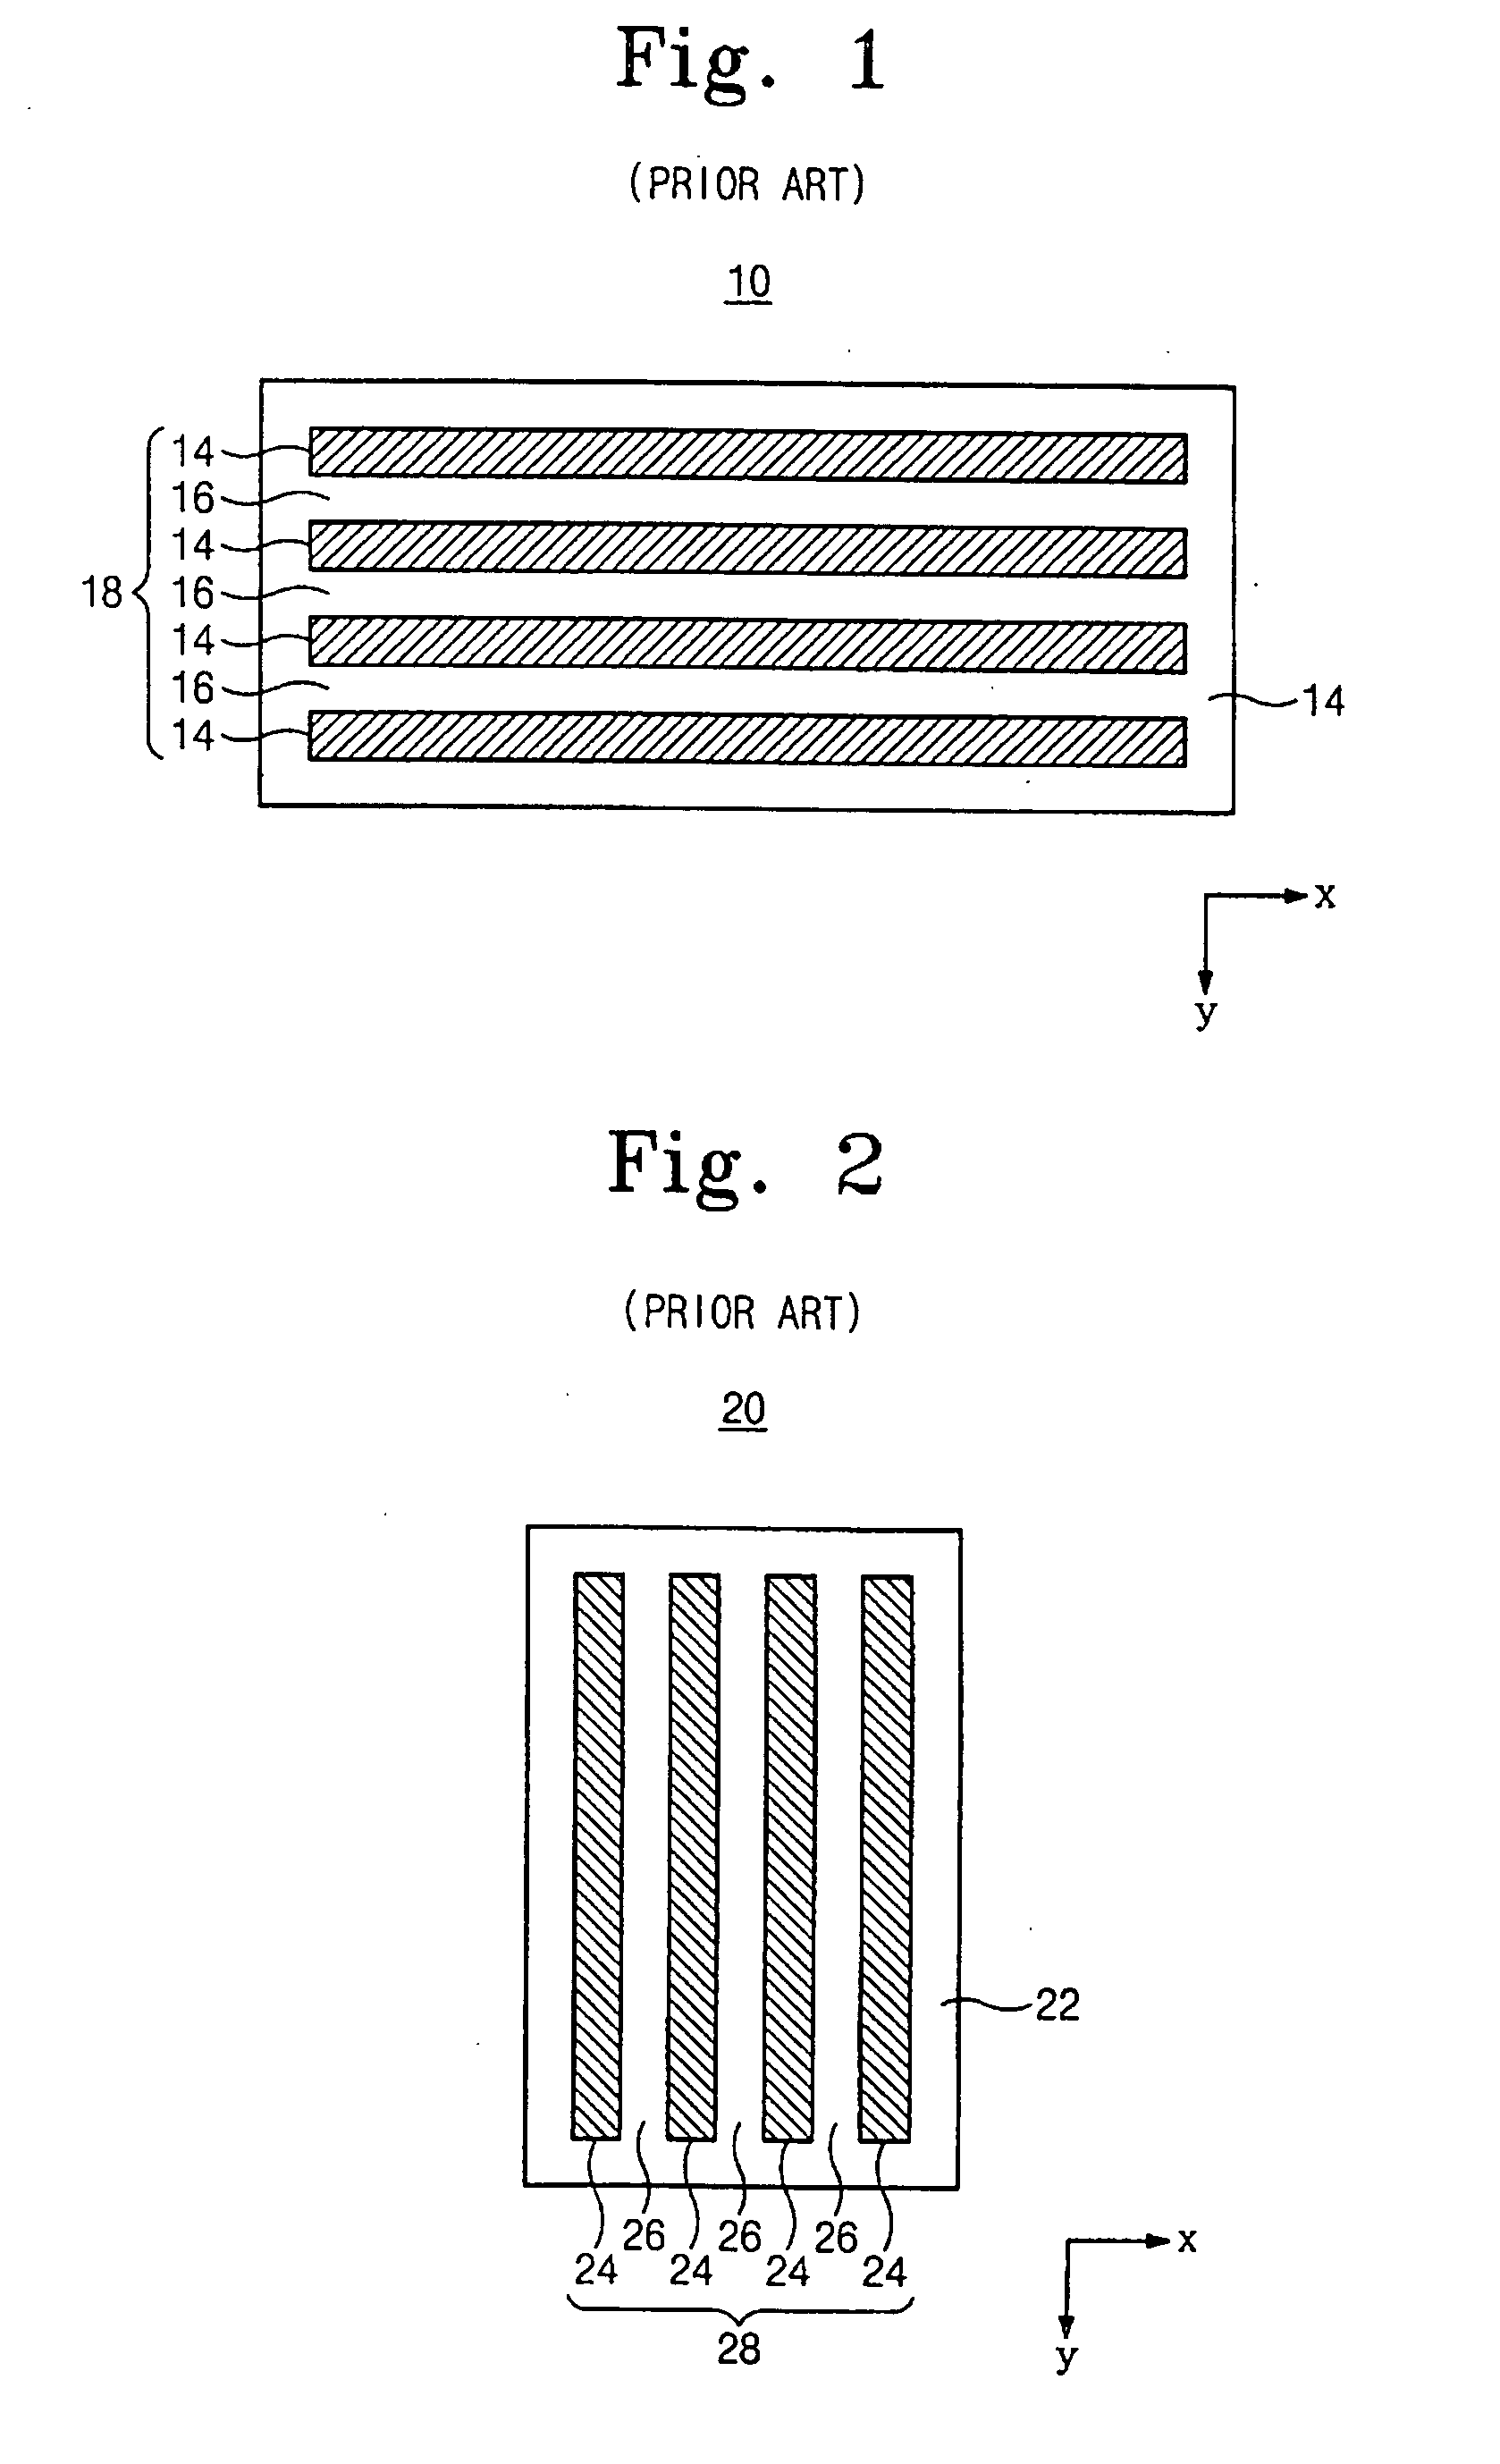 Apparatus for exposing a substrate, photomask and modified illuminating system of the apparatus, and method of forming a pattern on a substrate using the apparatus